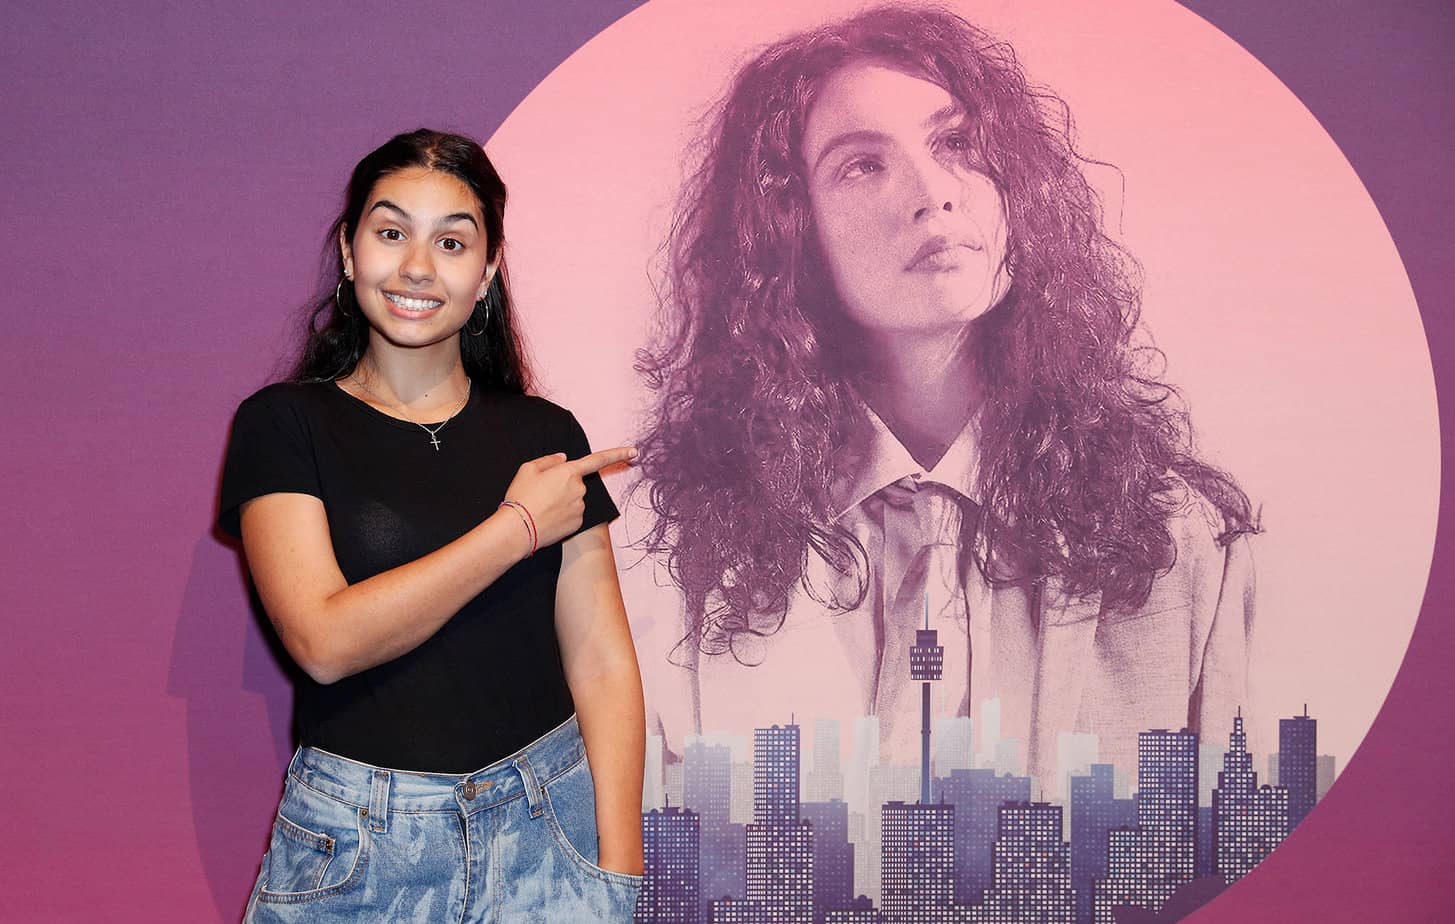 https://www.nme.com/features/film-interviews/soundtrack-of-my-life-alessia-cara-2674094